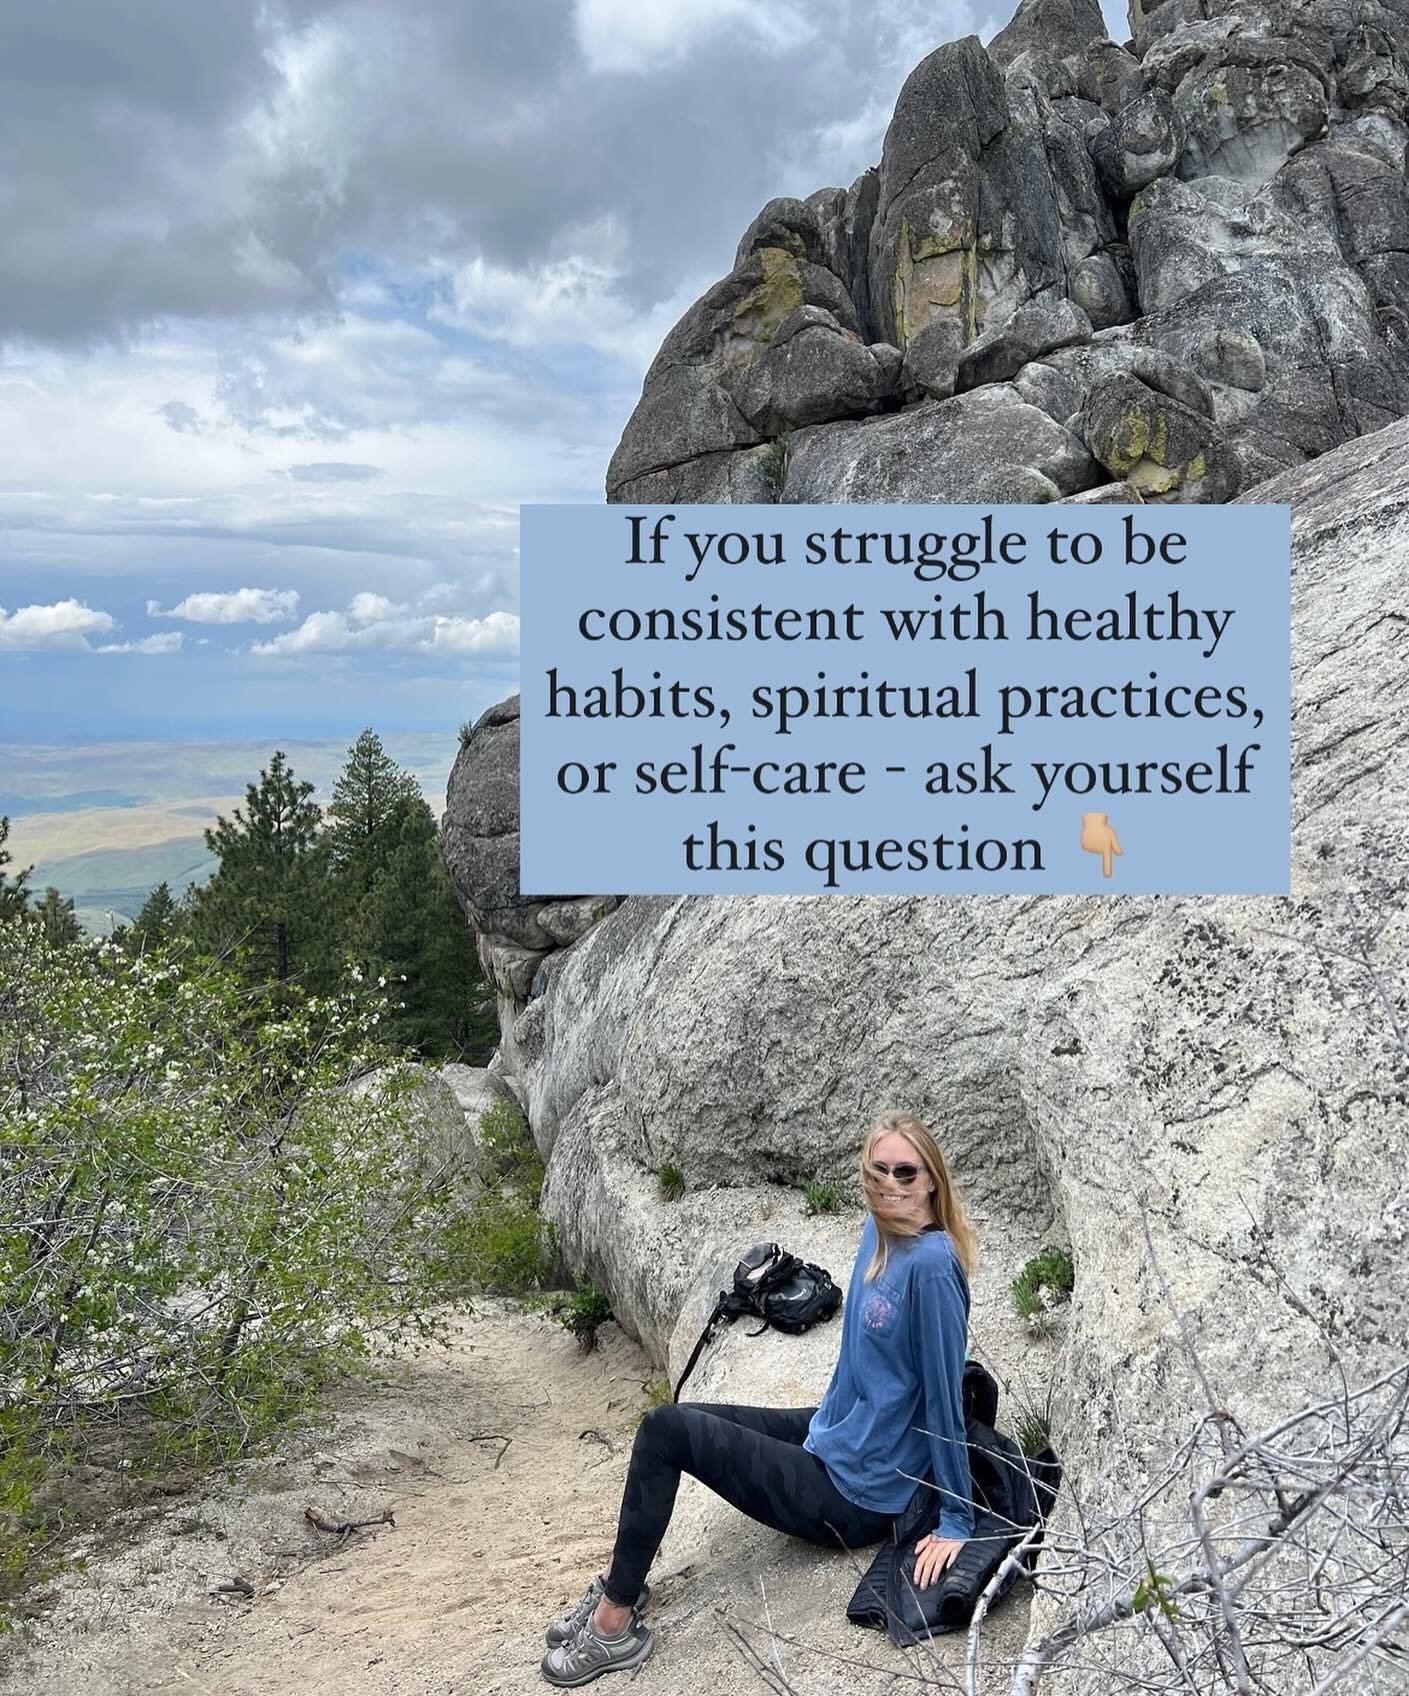 If you find yourself struggling to be consistent with healthy habits, spiritual practices, self-care practices, etc, ask yourself:

&ldquo;What would make it a yes for me?&rdquo;

Then negotiate with yourself around it. What would have to be in place